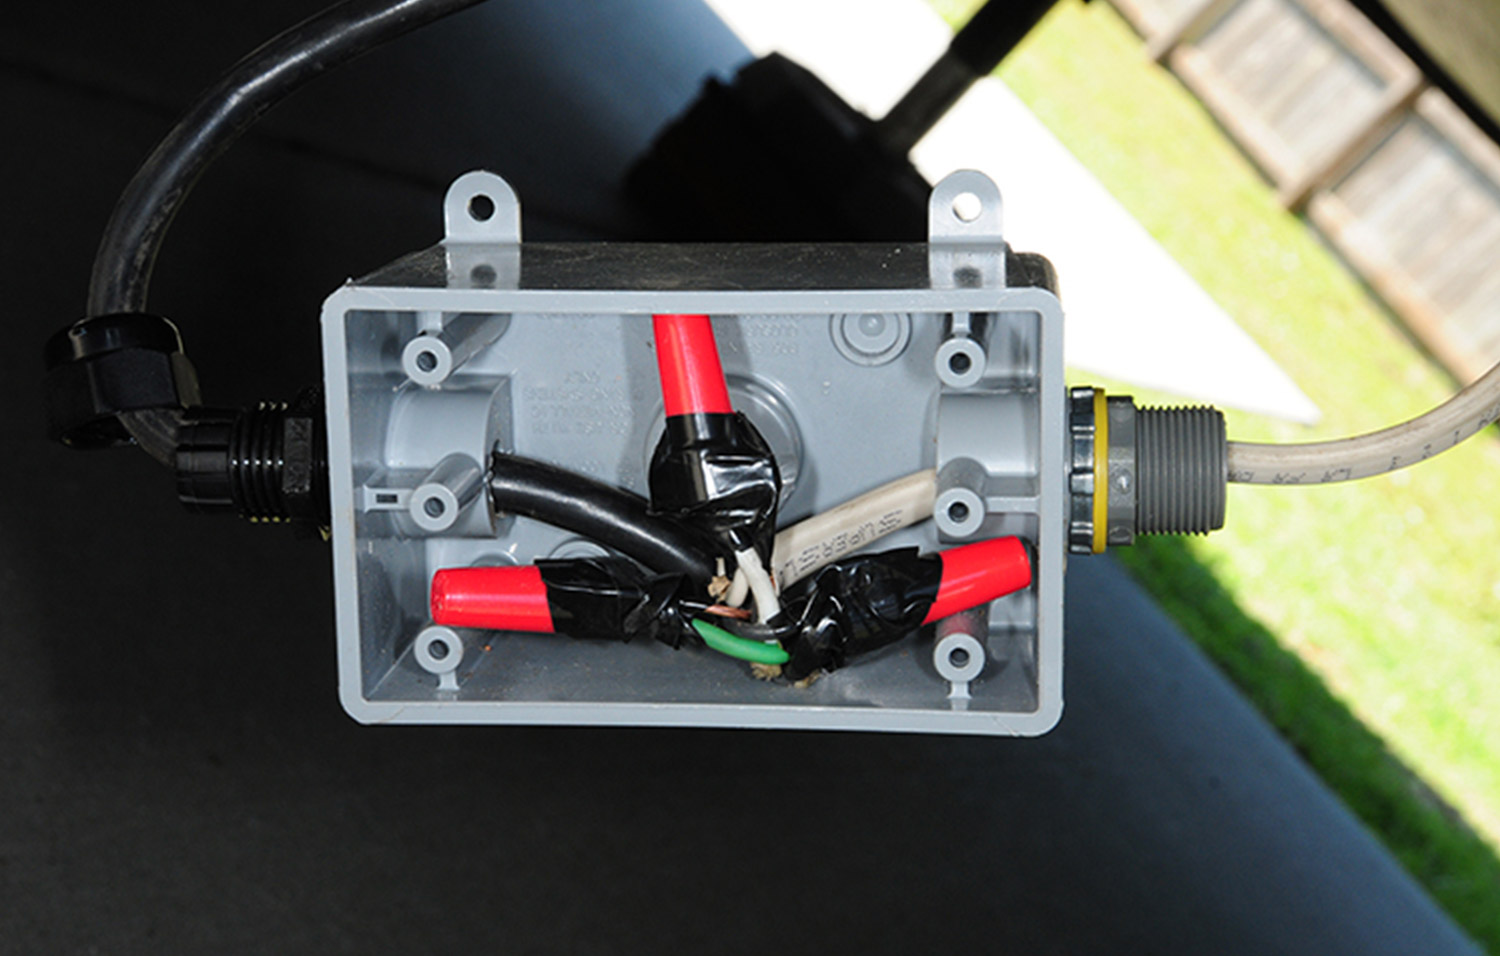 the junction box with wires organized and secured with electrical tape